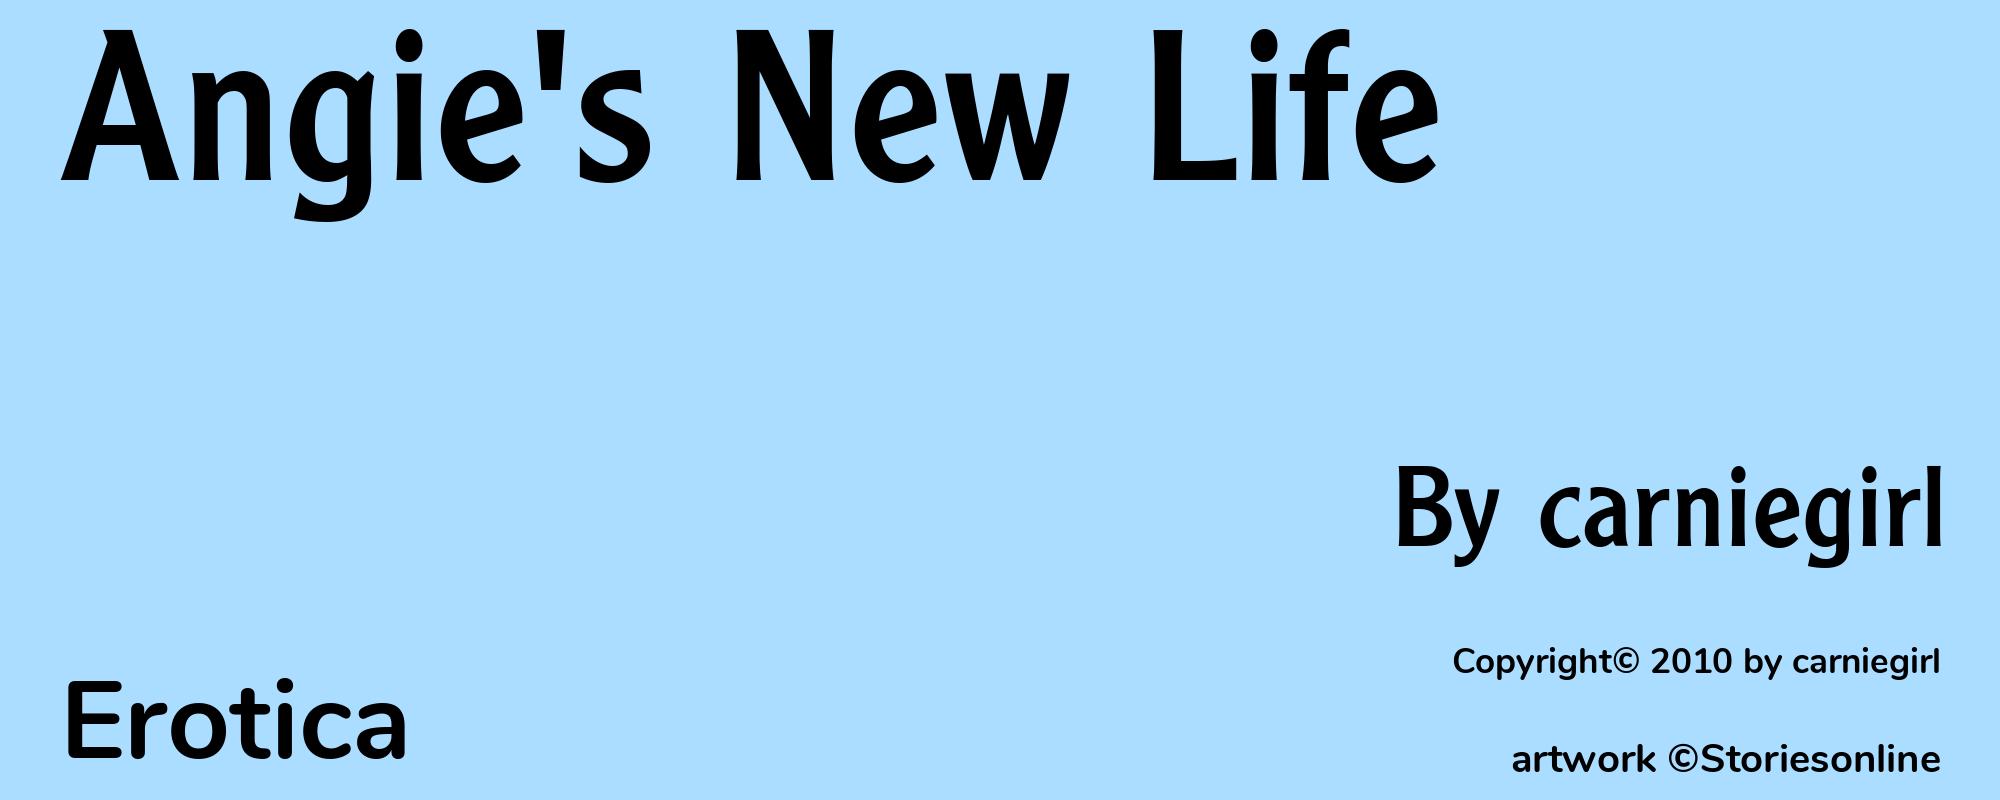 Angie's New Life - Cover